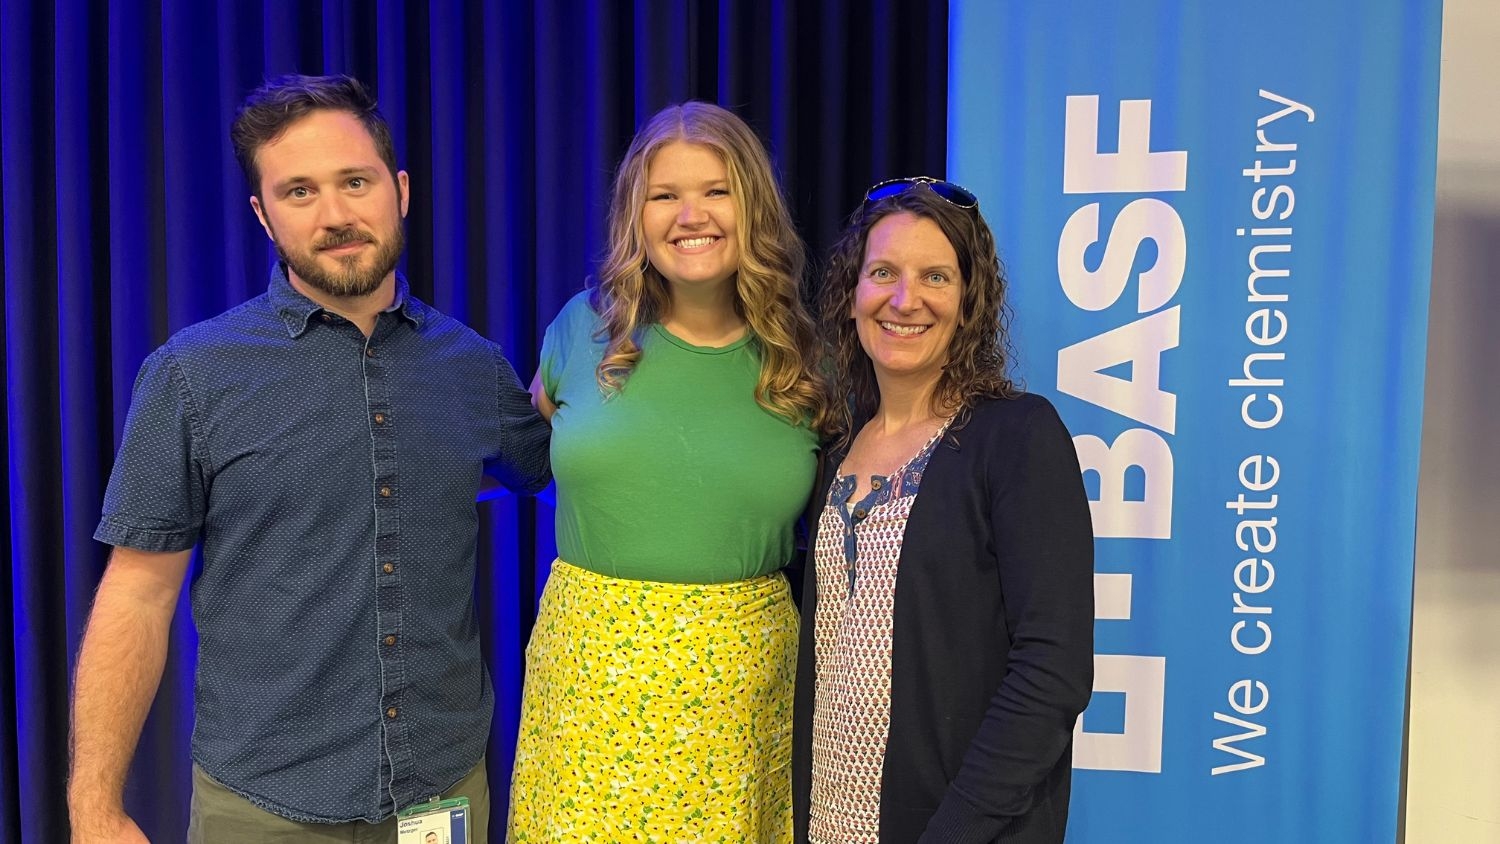 Peyton Gardner with the internal communications team in front of a BASF logo